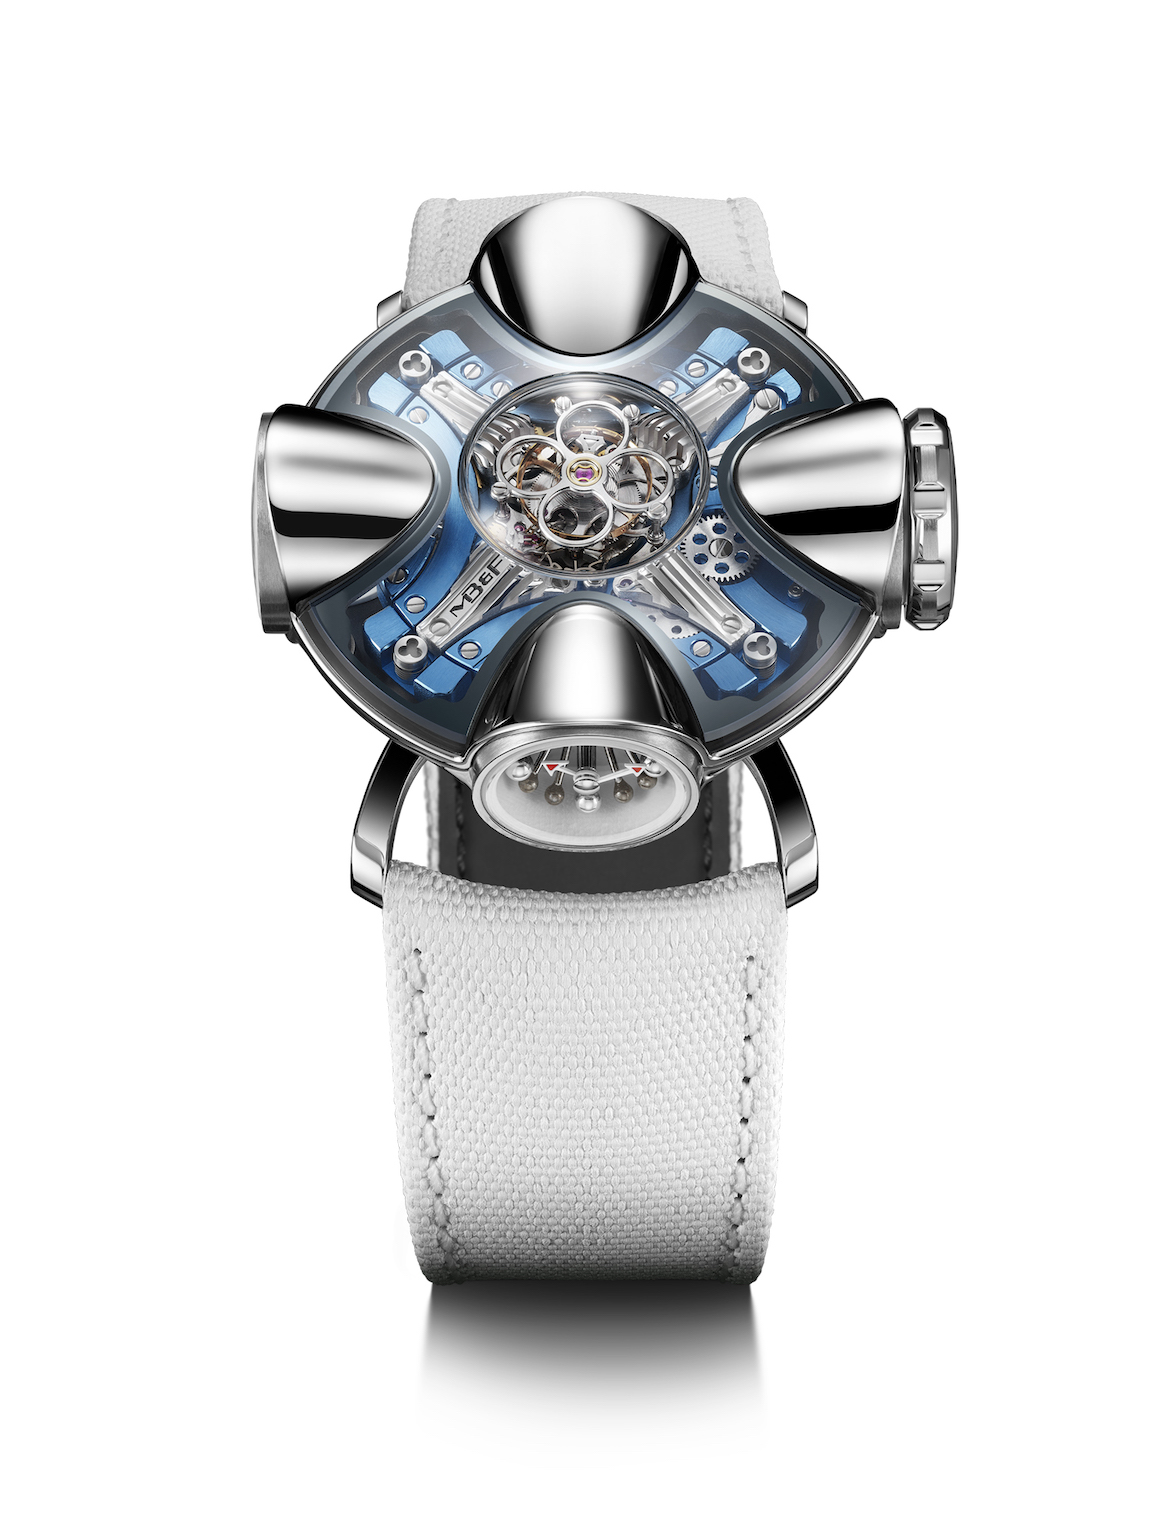 MB&F Horological Machine No. 11 Architect in blue